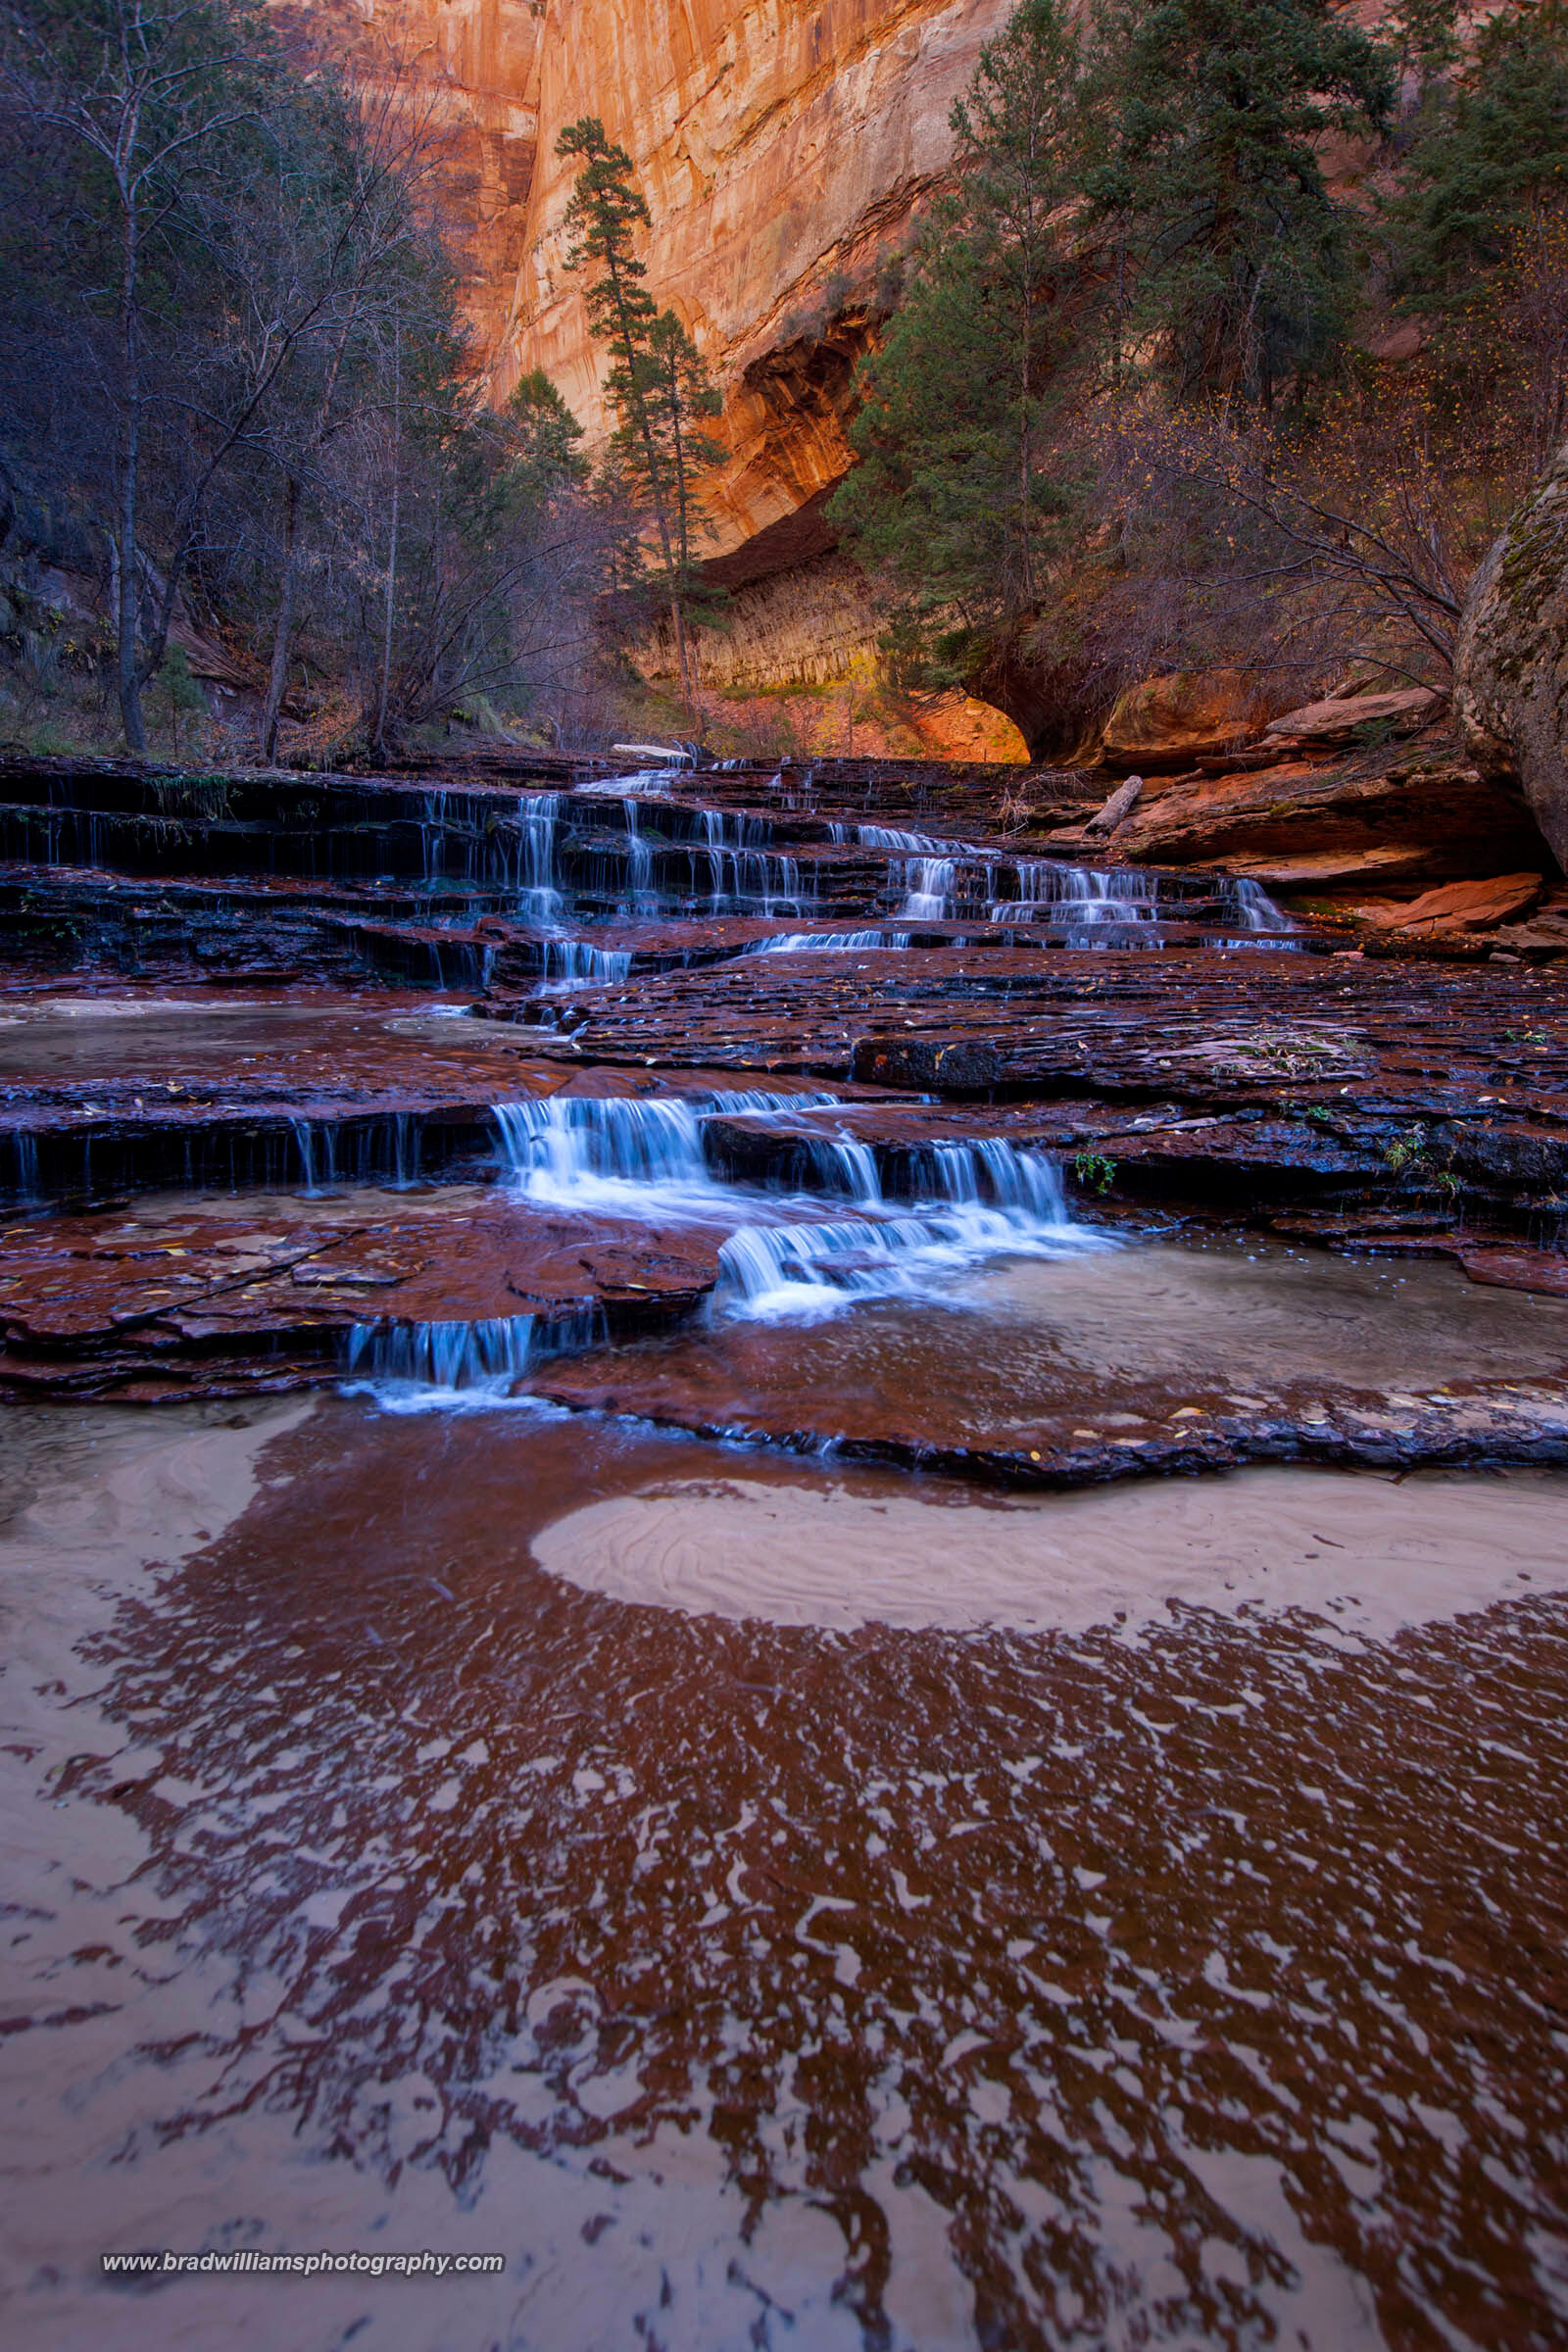 The beautiful Archangel Falls in Zion National Park's Left Fork of North Creek.